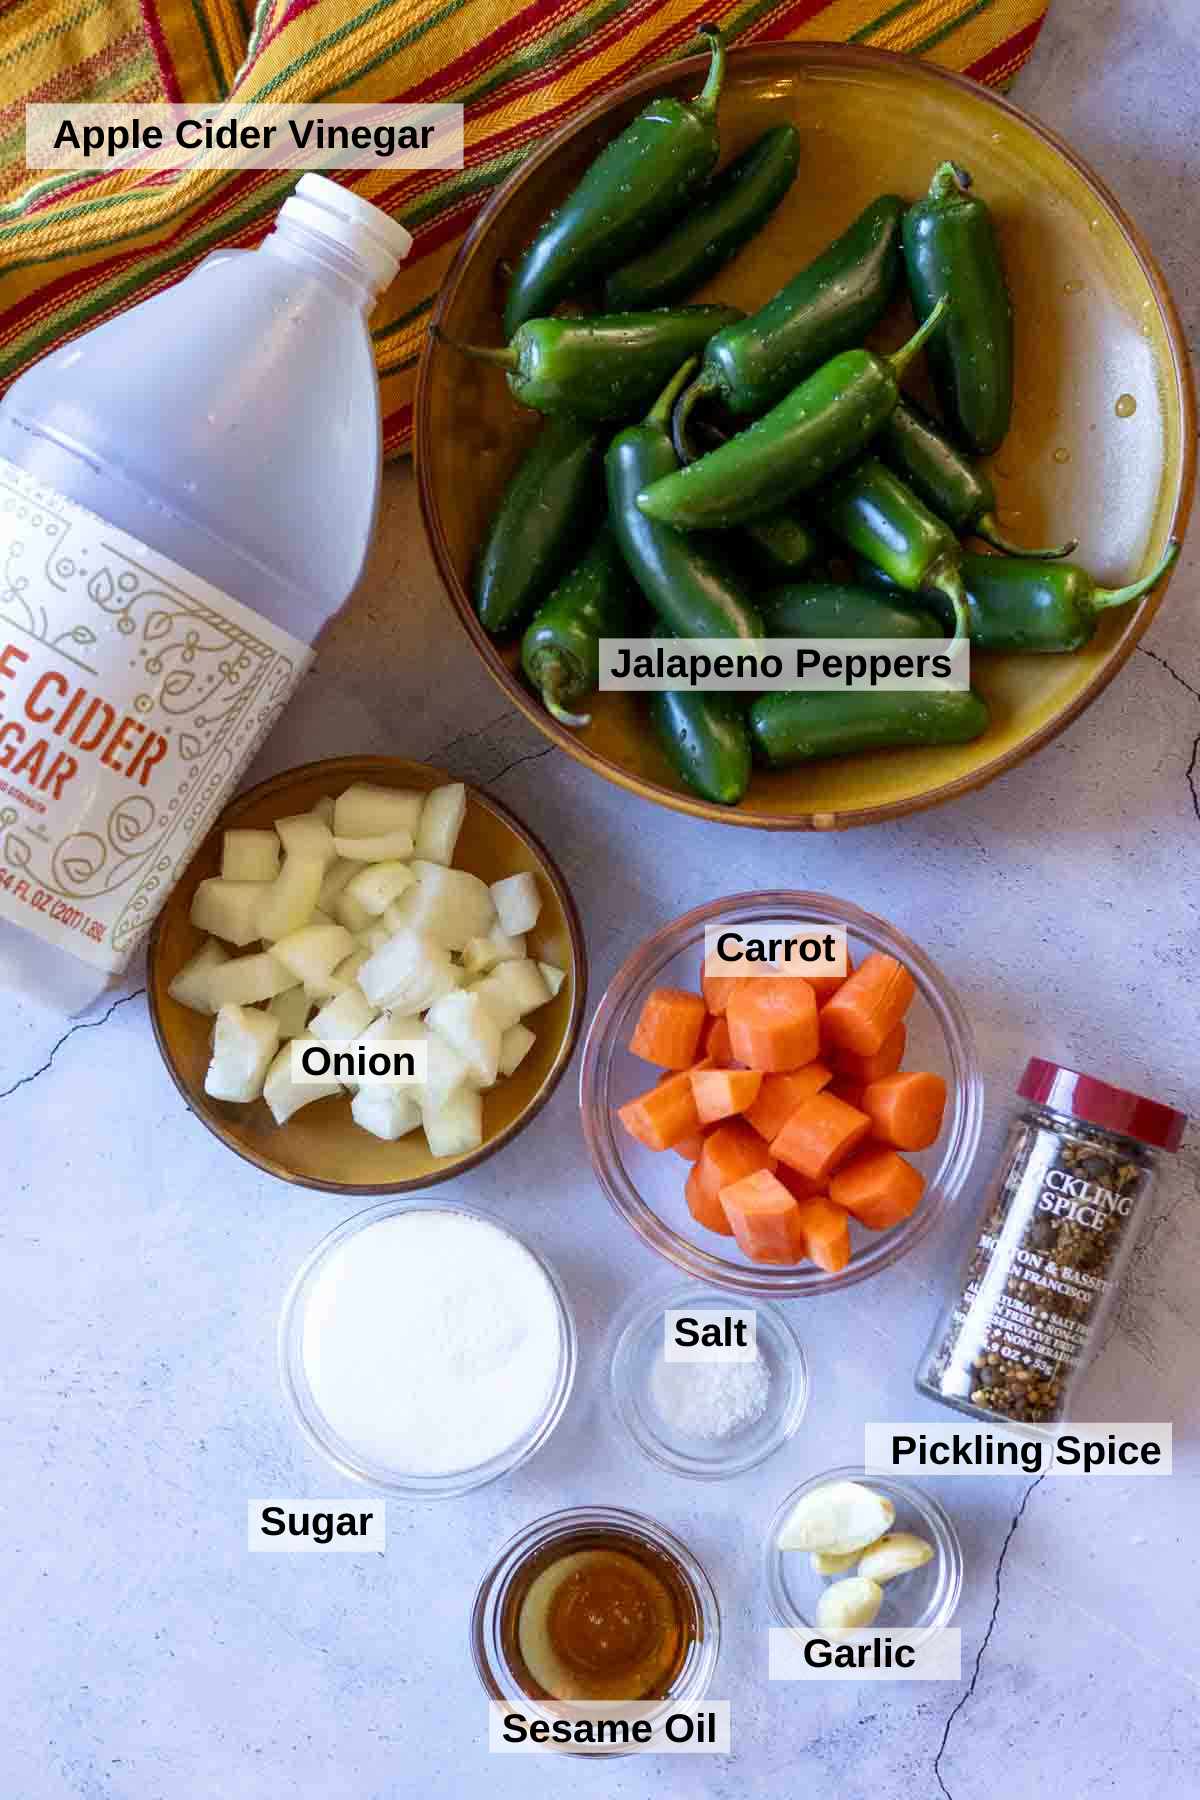 Ingredients to make pickles jalapeno peppers.